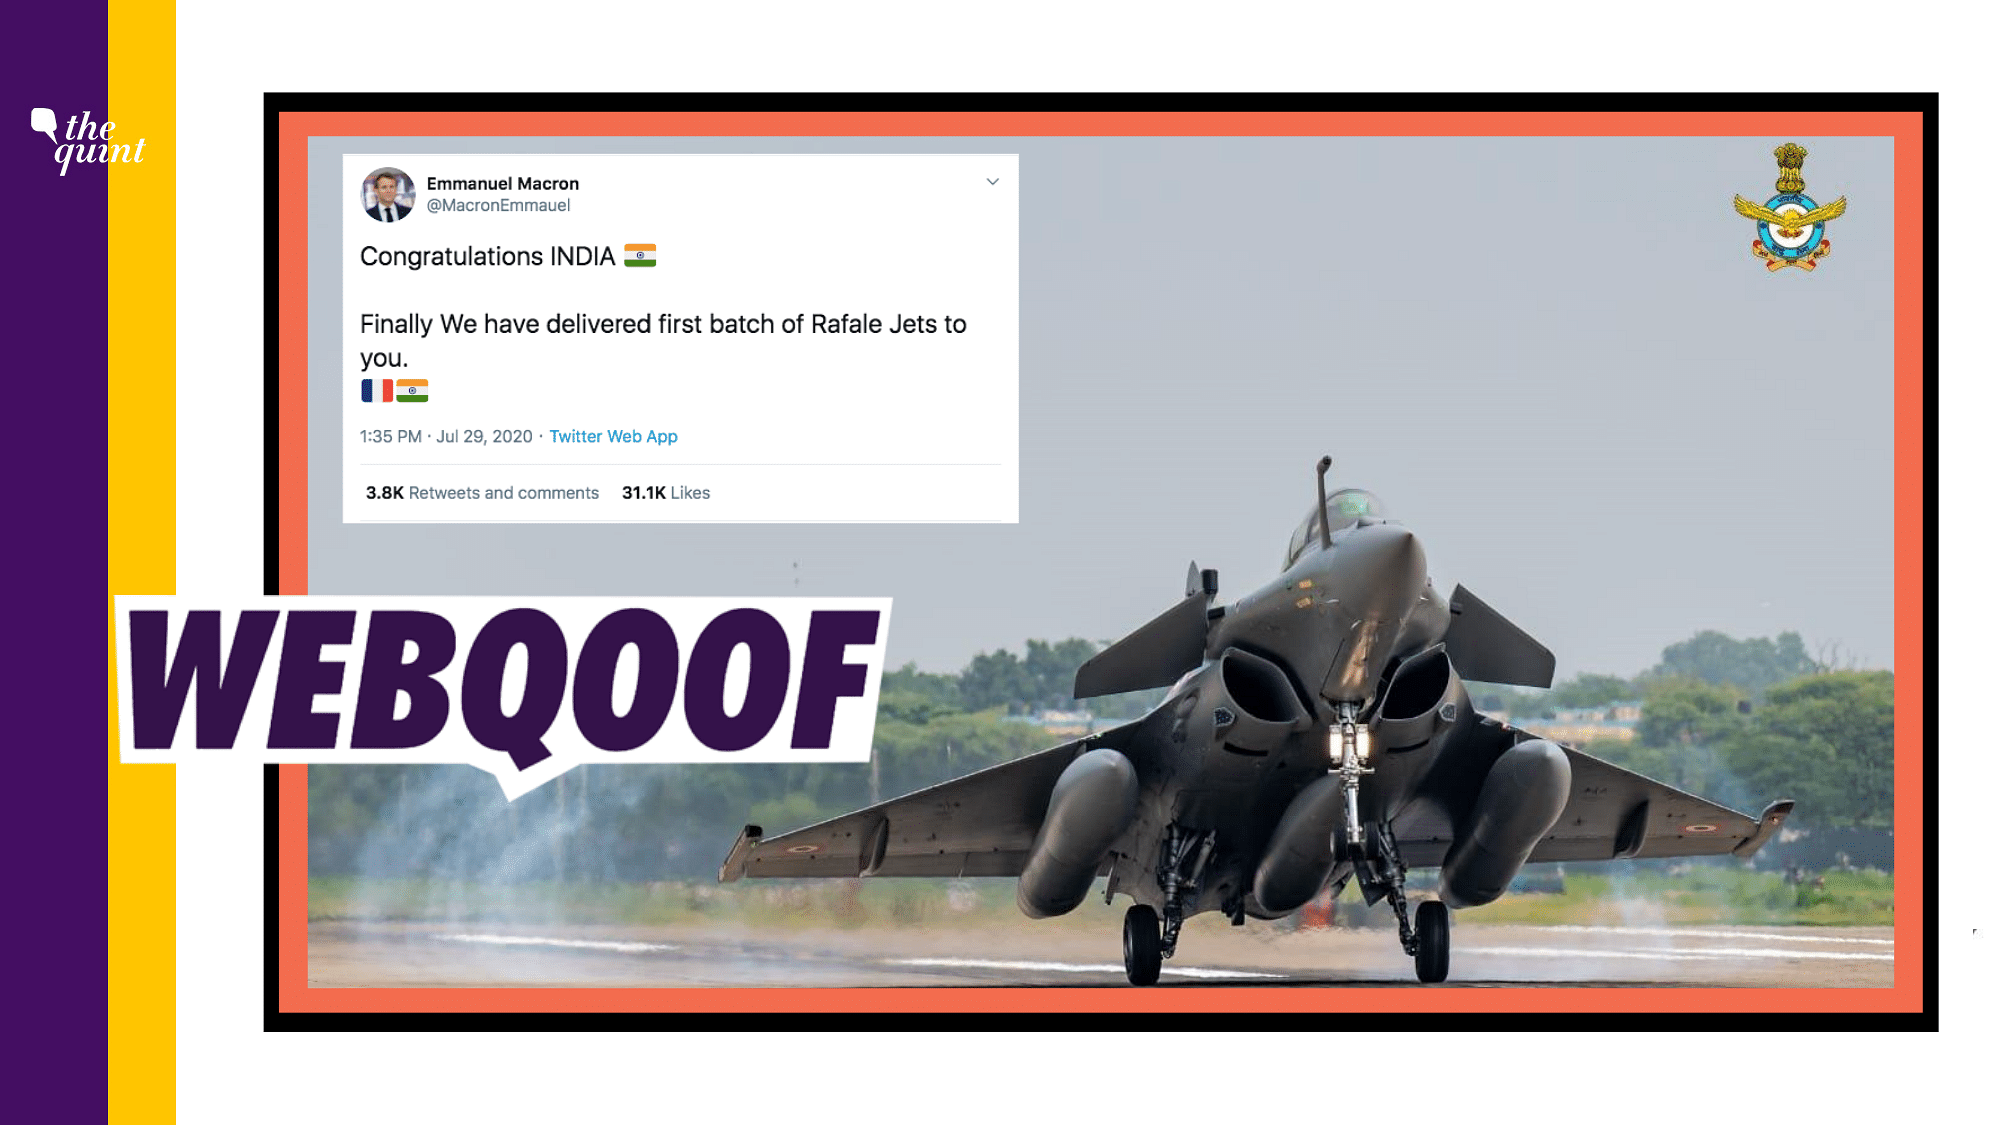 A parody Twitter account with a history of changing its username is being used to claim that French President Emmanuel Macron has congratulated India on the arrival of the Rafale jets.